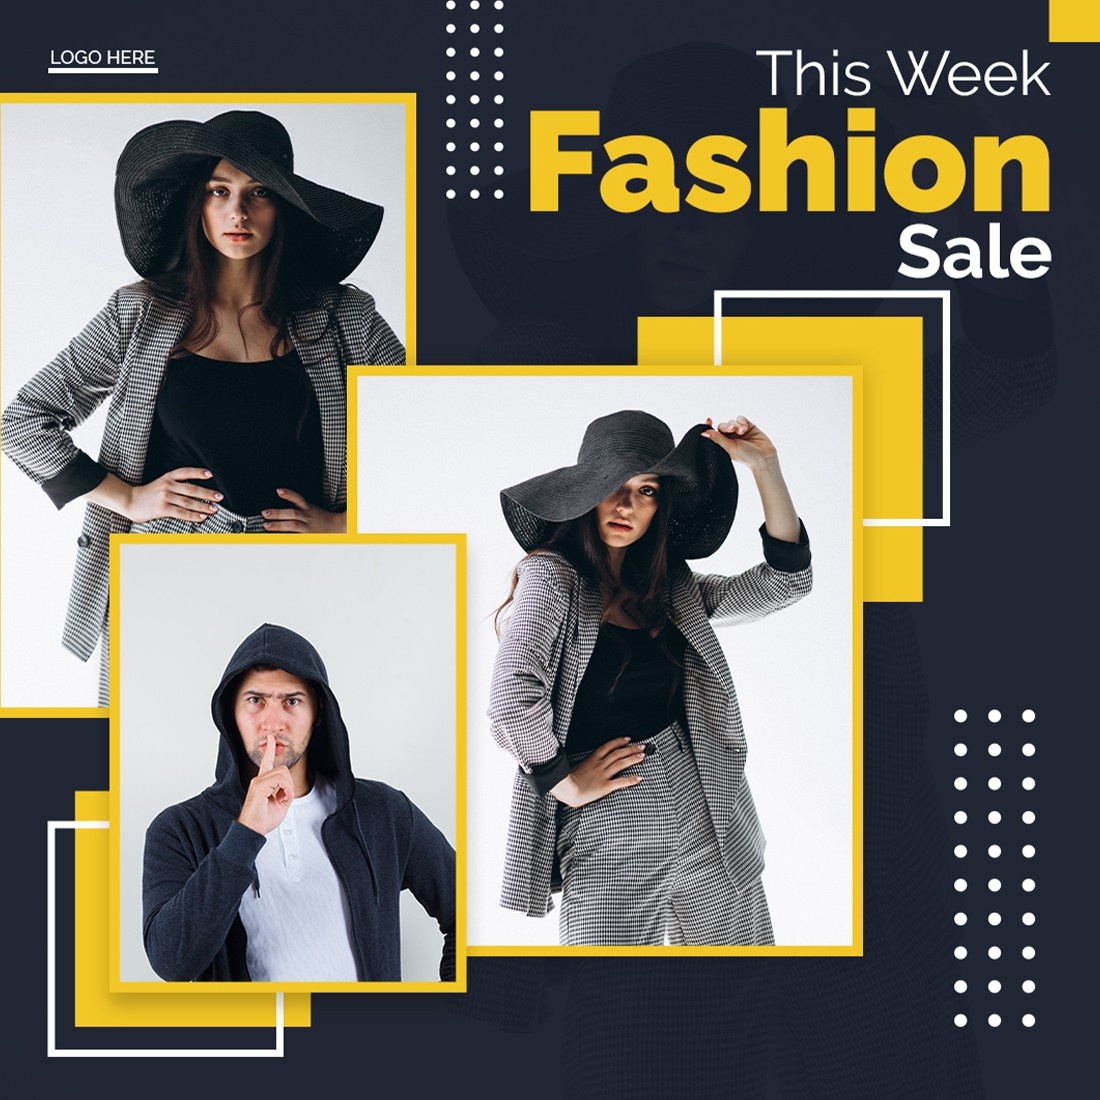 Woman Fashion Sale Social Media Post Template For Instagram cover image.